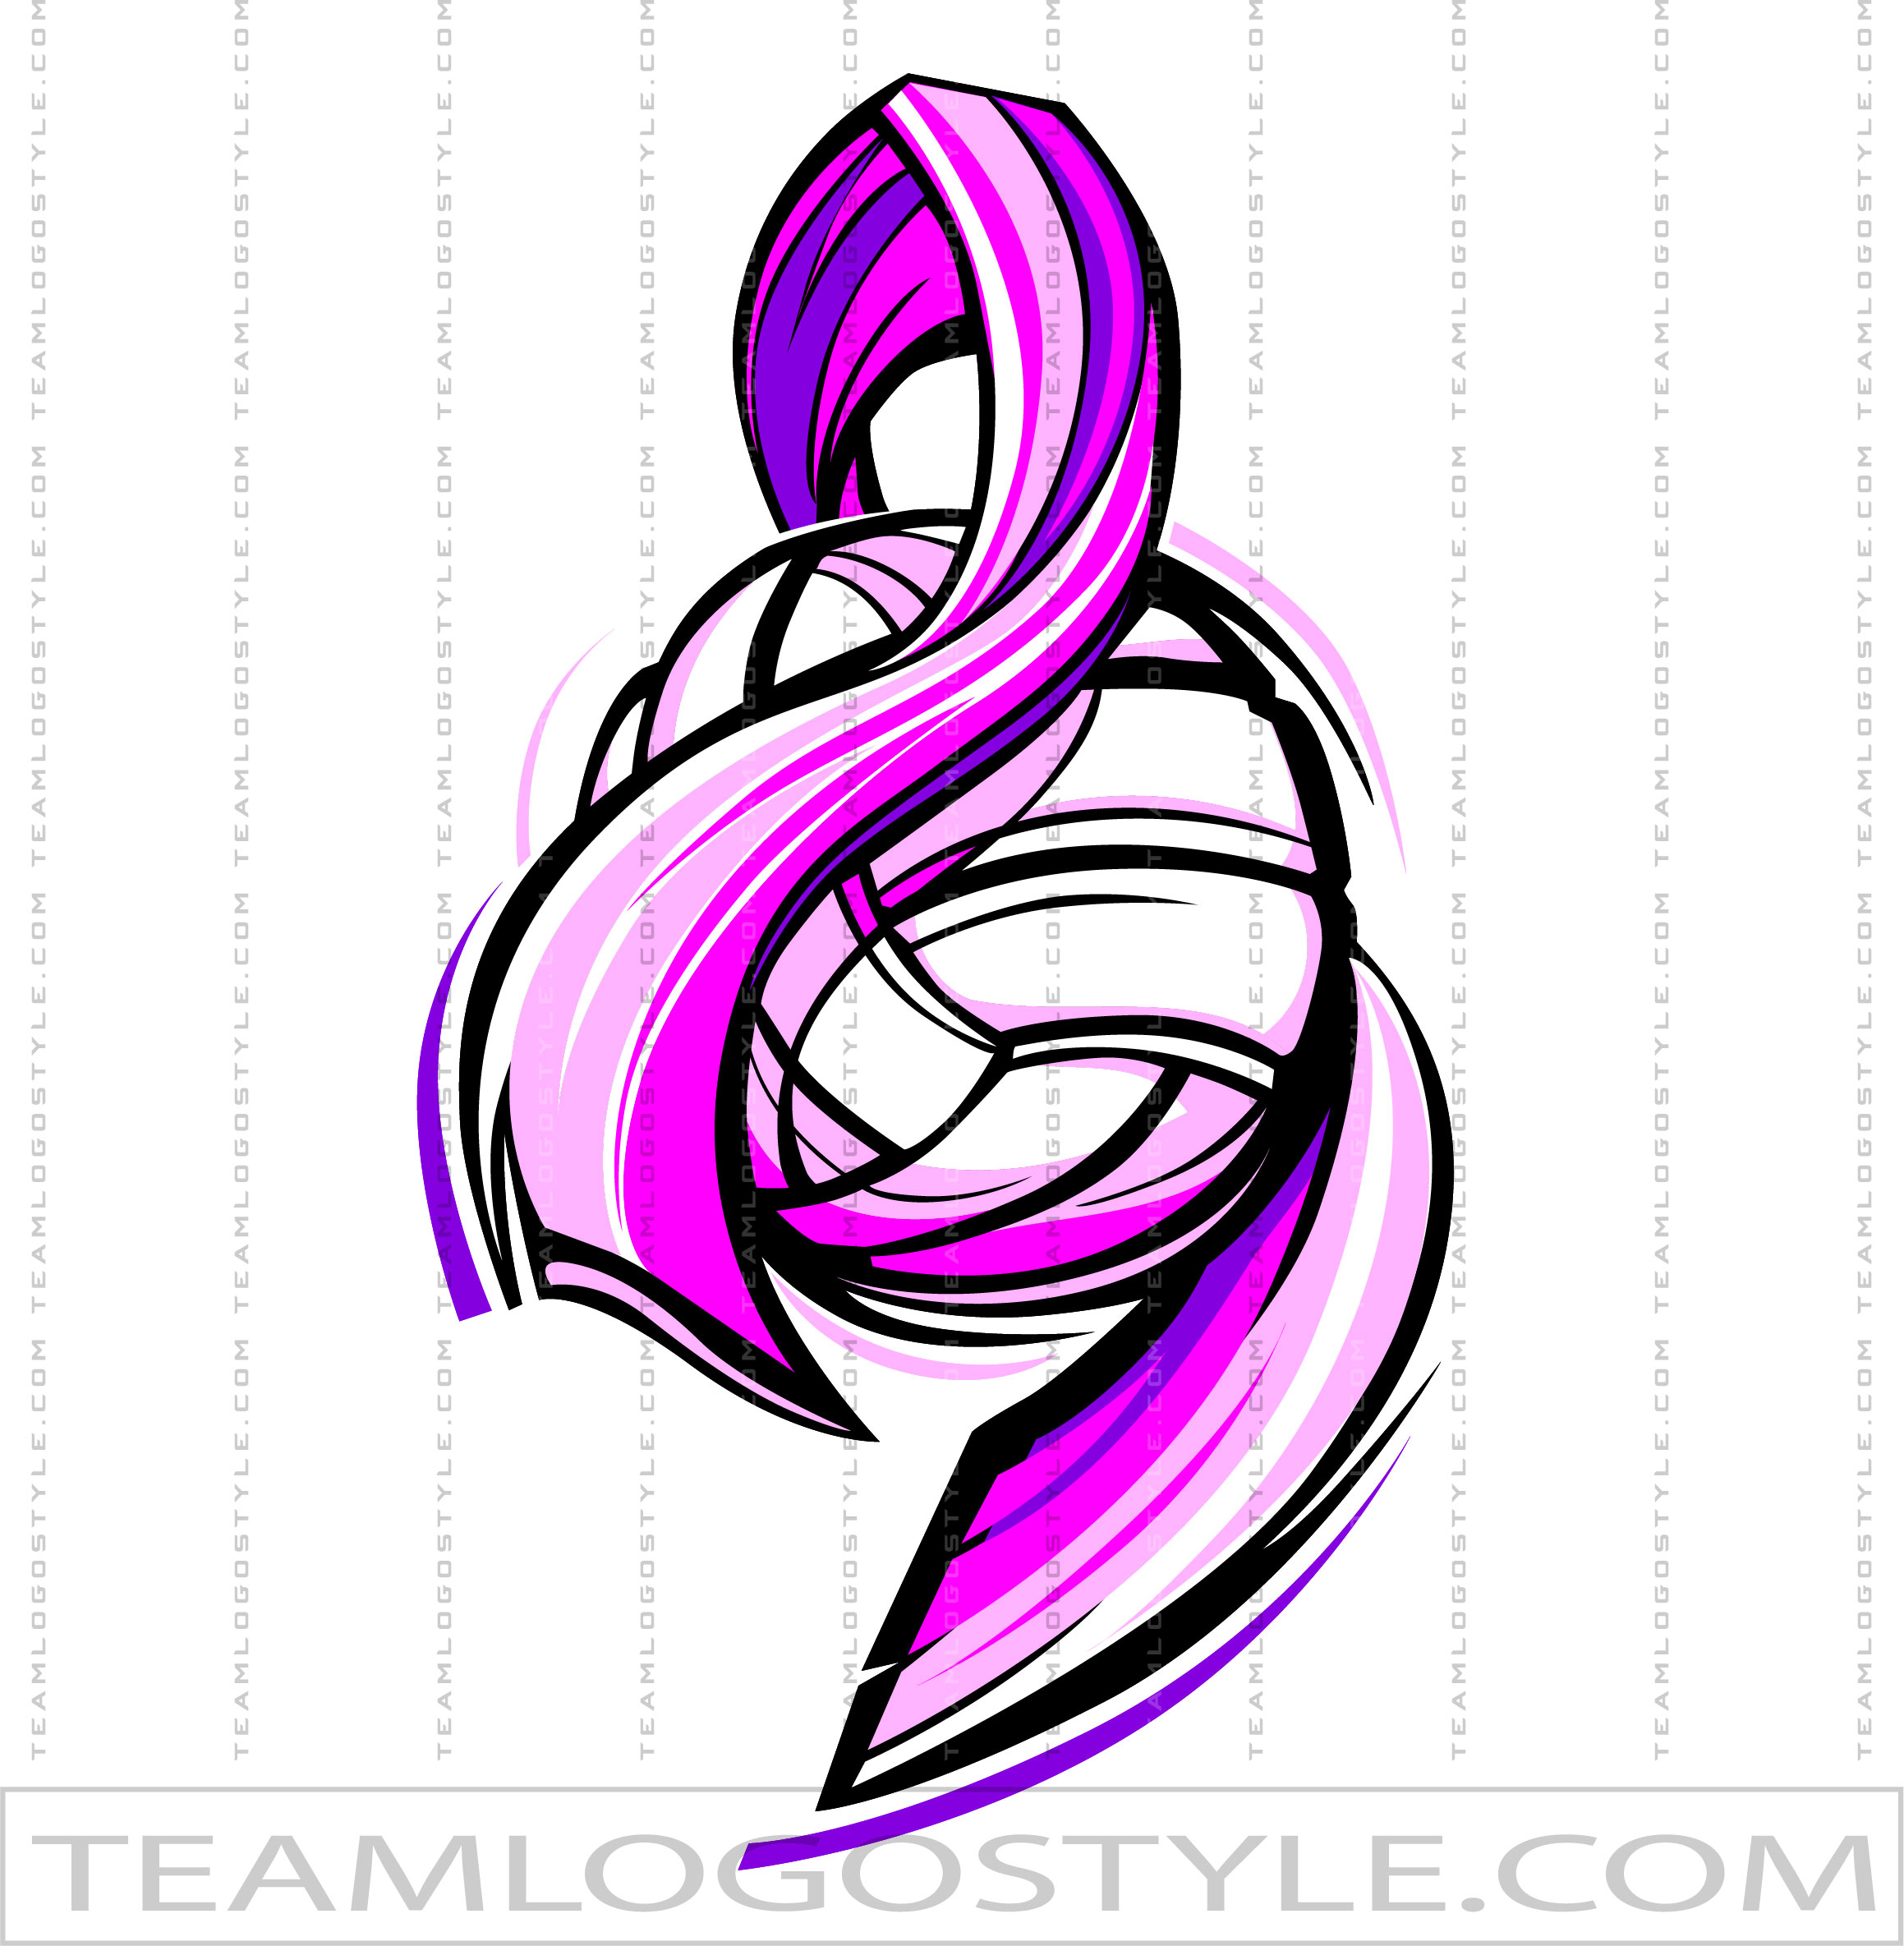 Christmas Volleyball Ribbon - Graphic Vector Volleyball Image